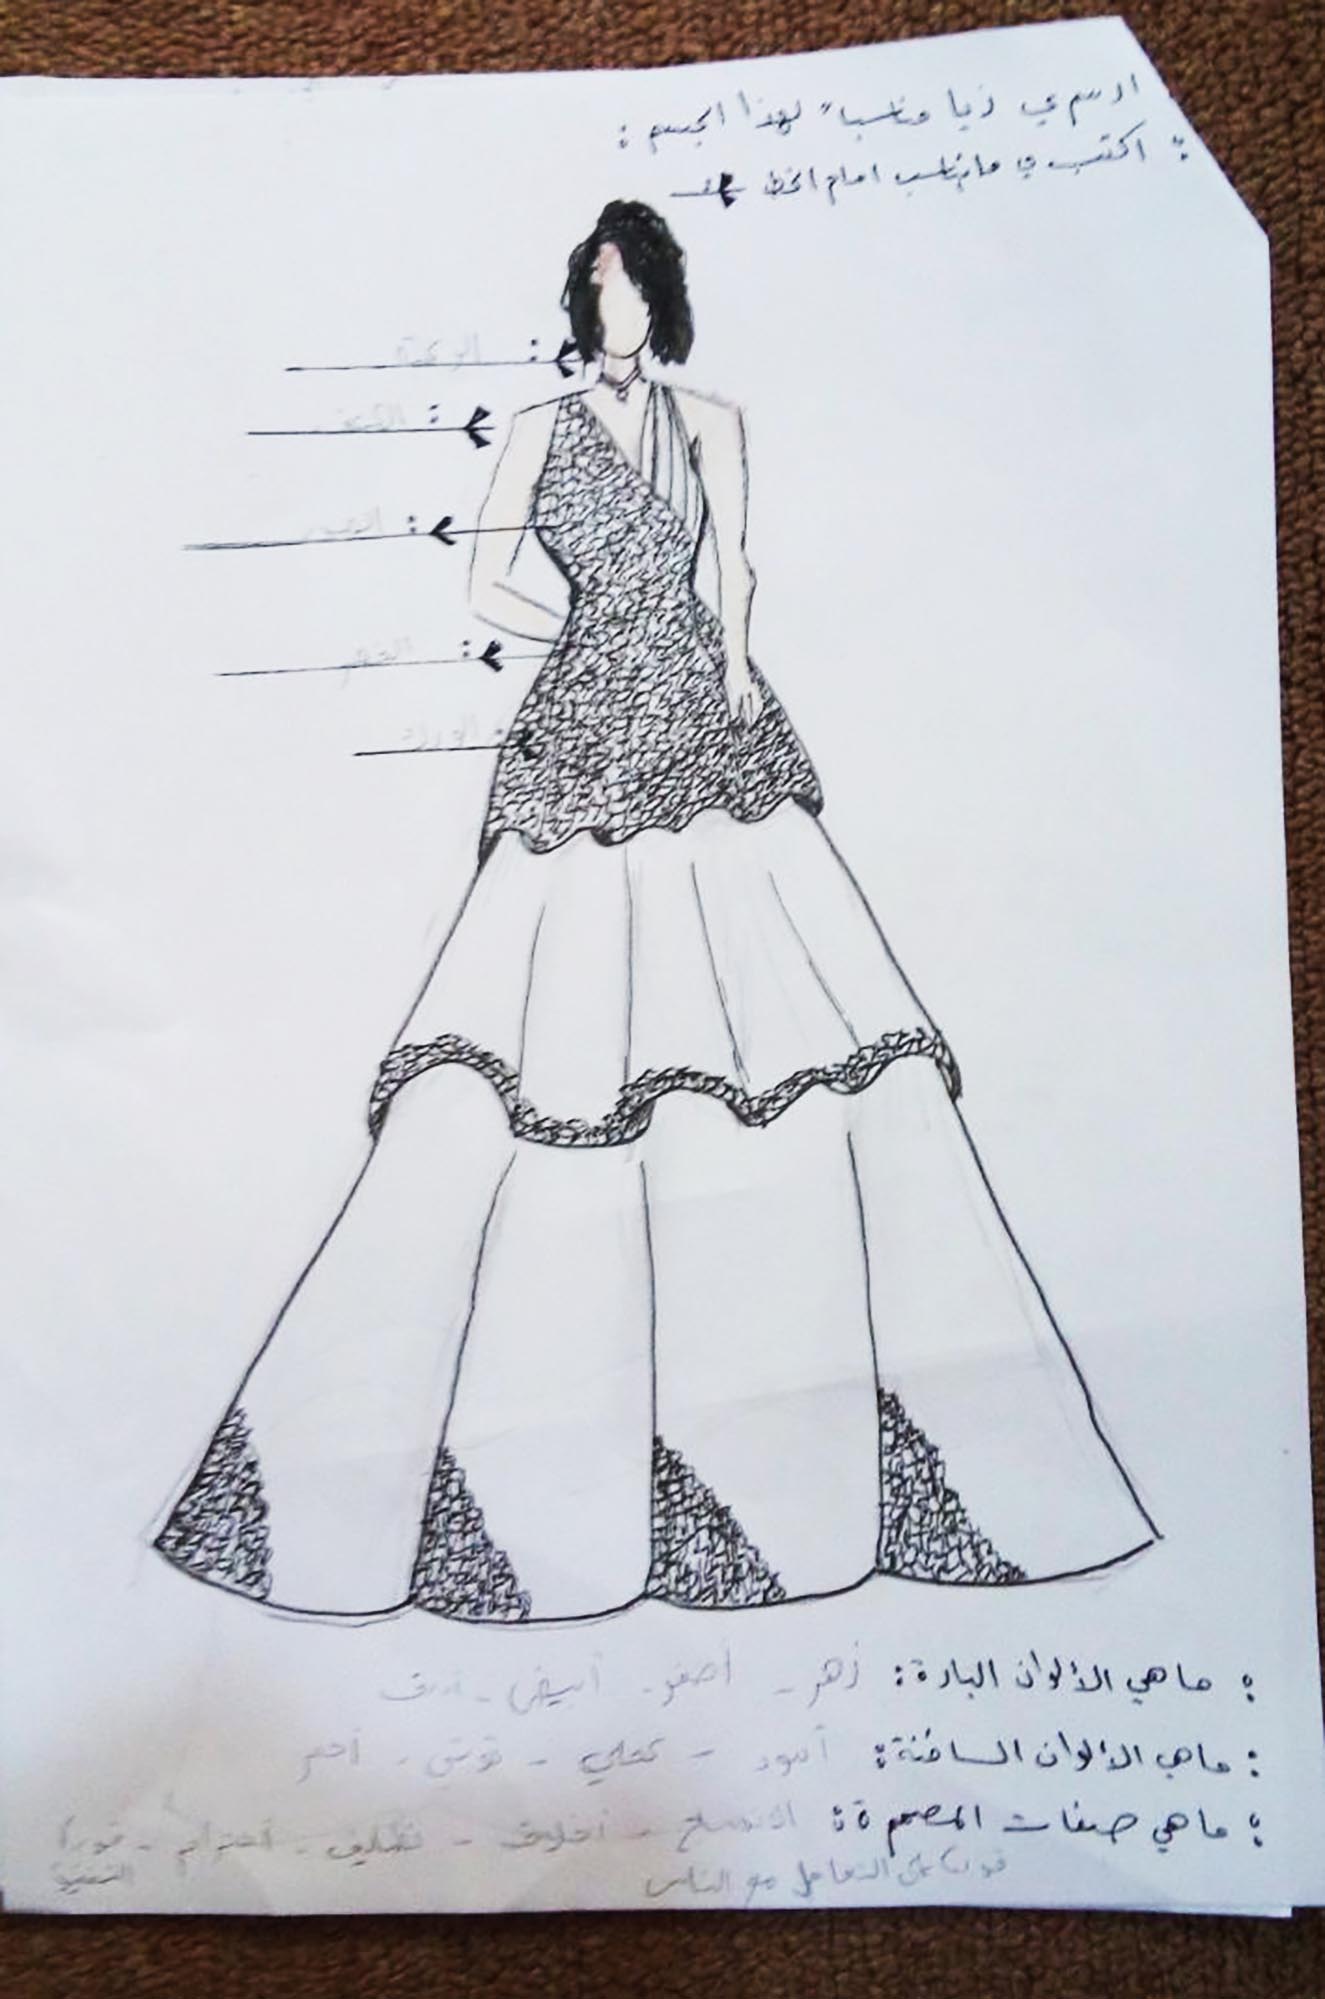 Aya sketches a dress as part of her internship with a local seamstress.